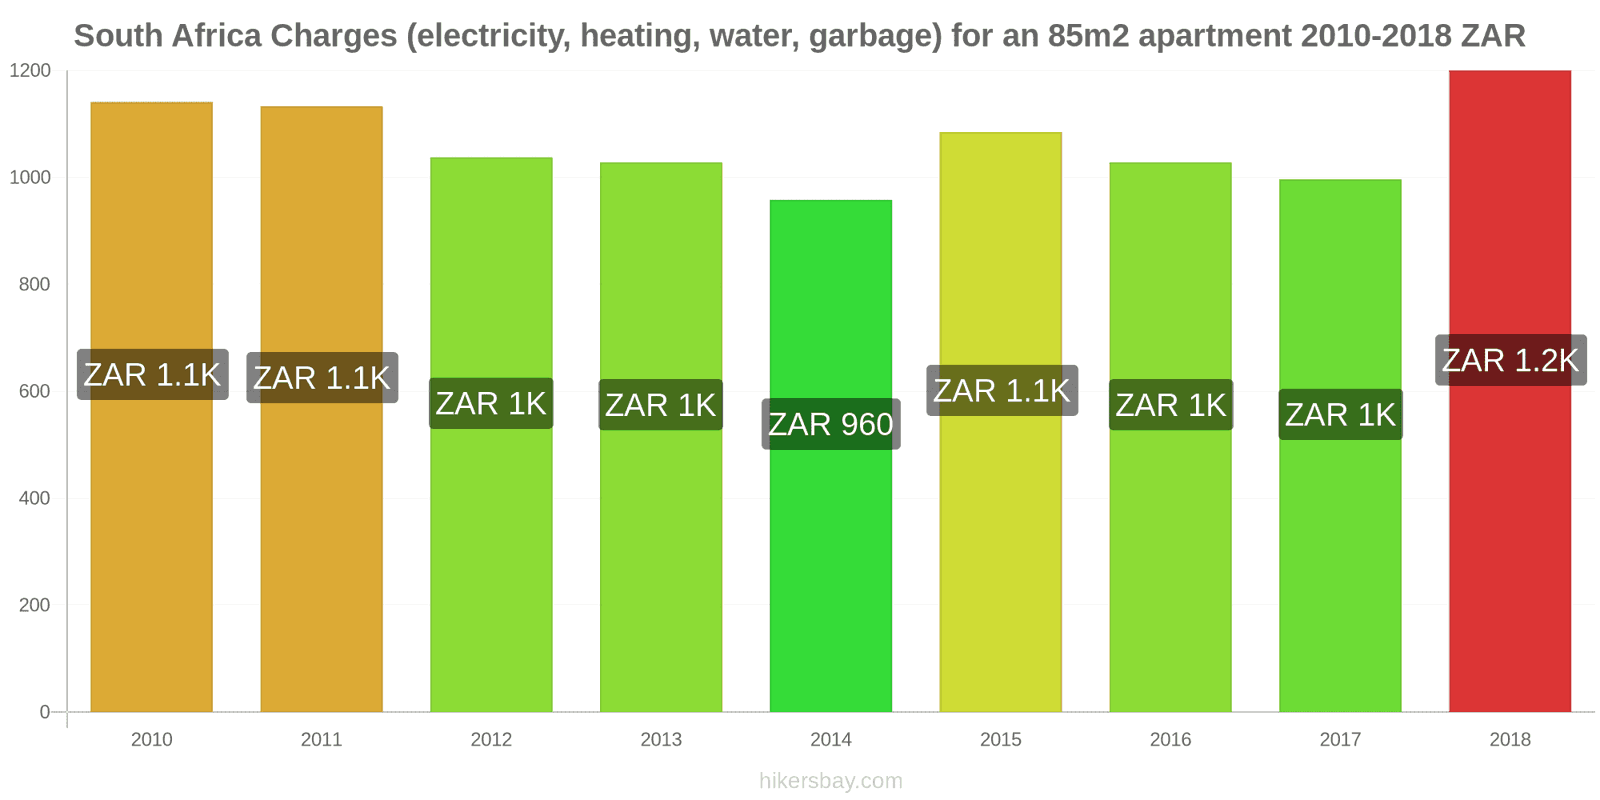 South Africa price changes Utilities (electricity, heating, water, garbage) for an 85m2 apartment hikersbay.com